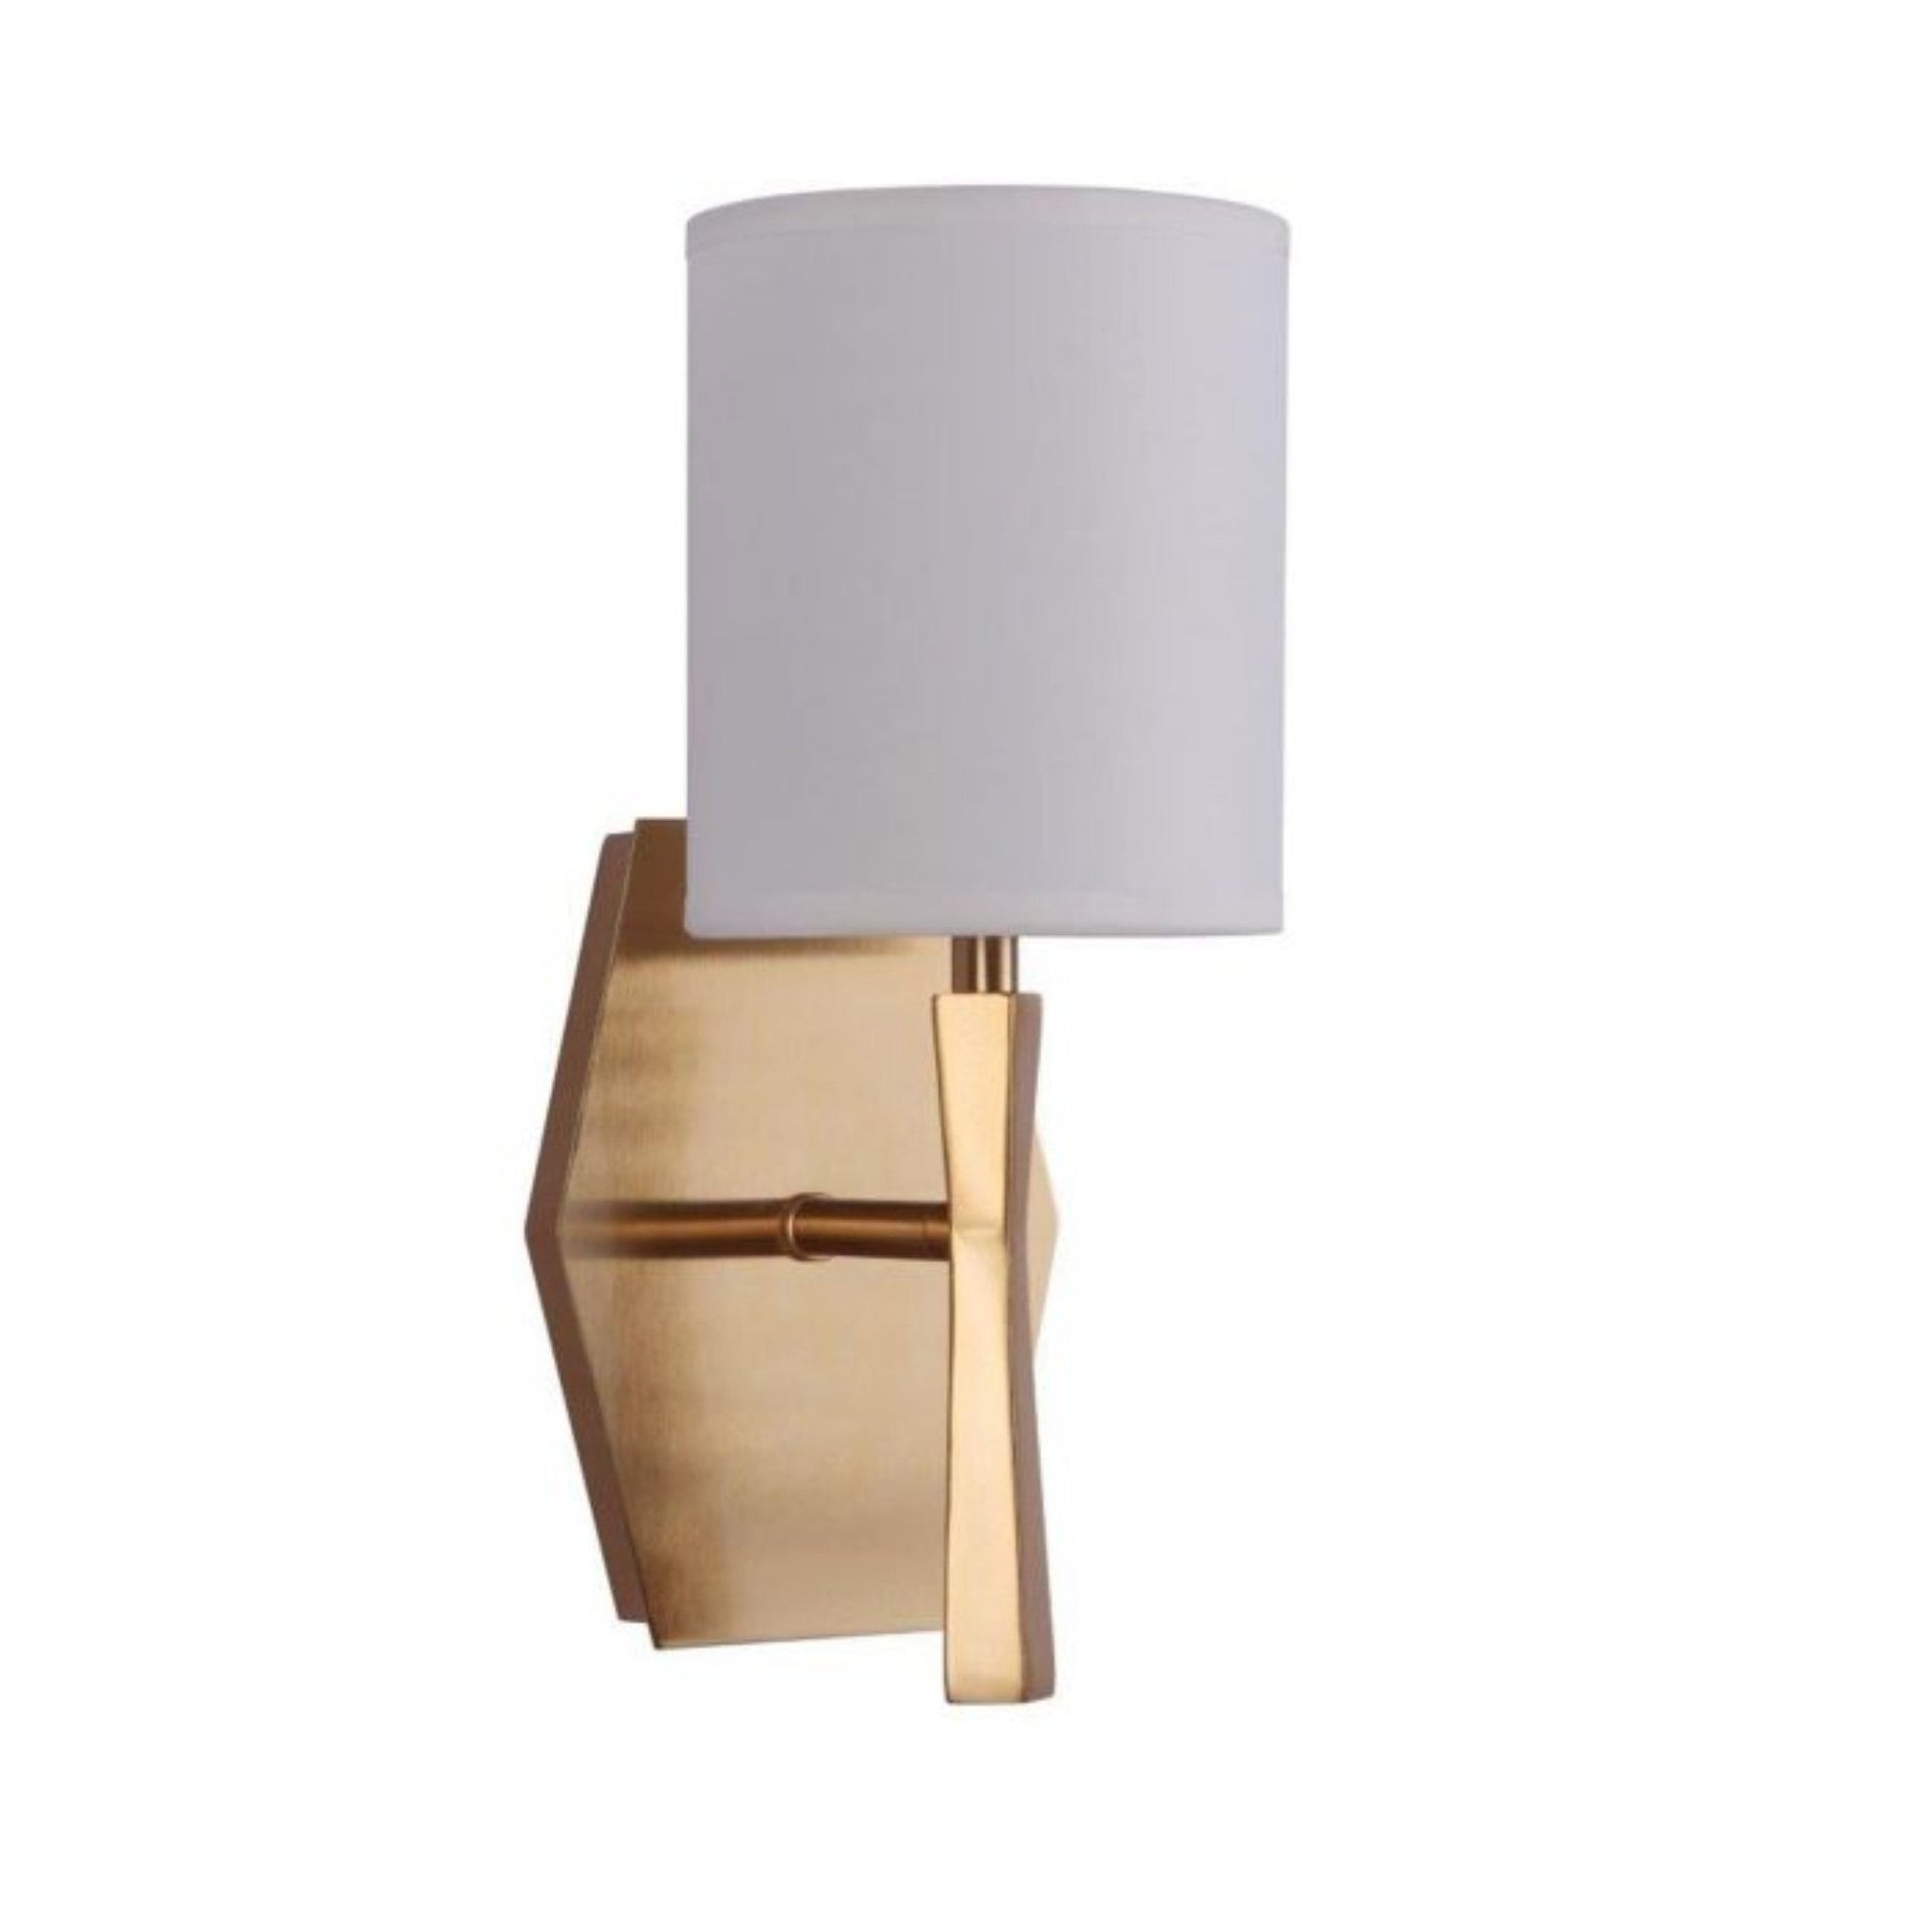 Craftmade Chatham 5" x 11" 1-Light Satin Brass Wall Sconce With White Linen Shade